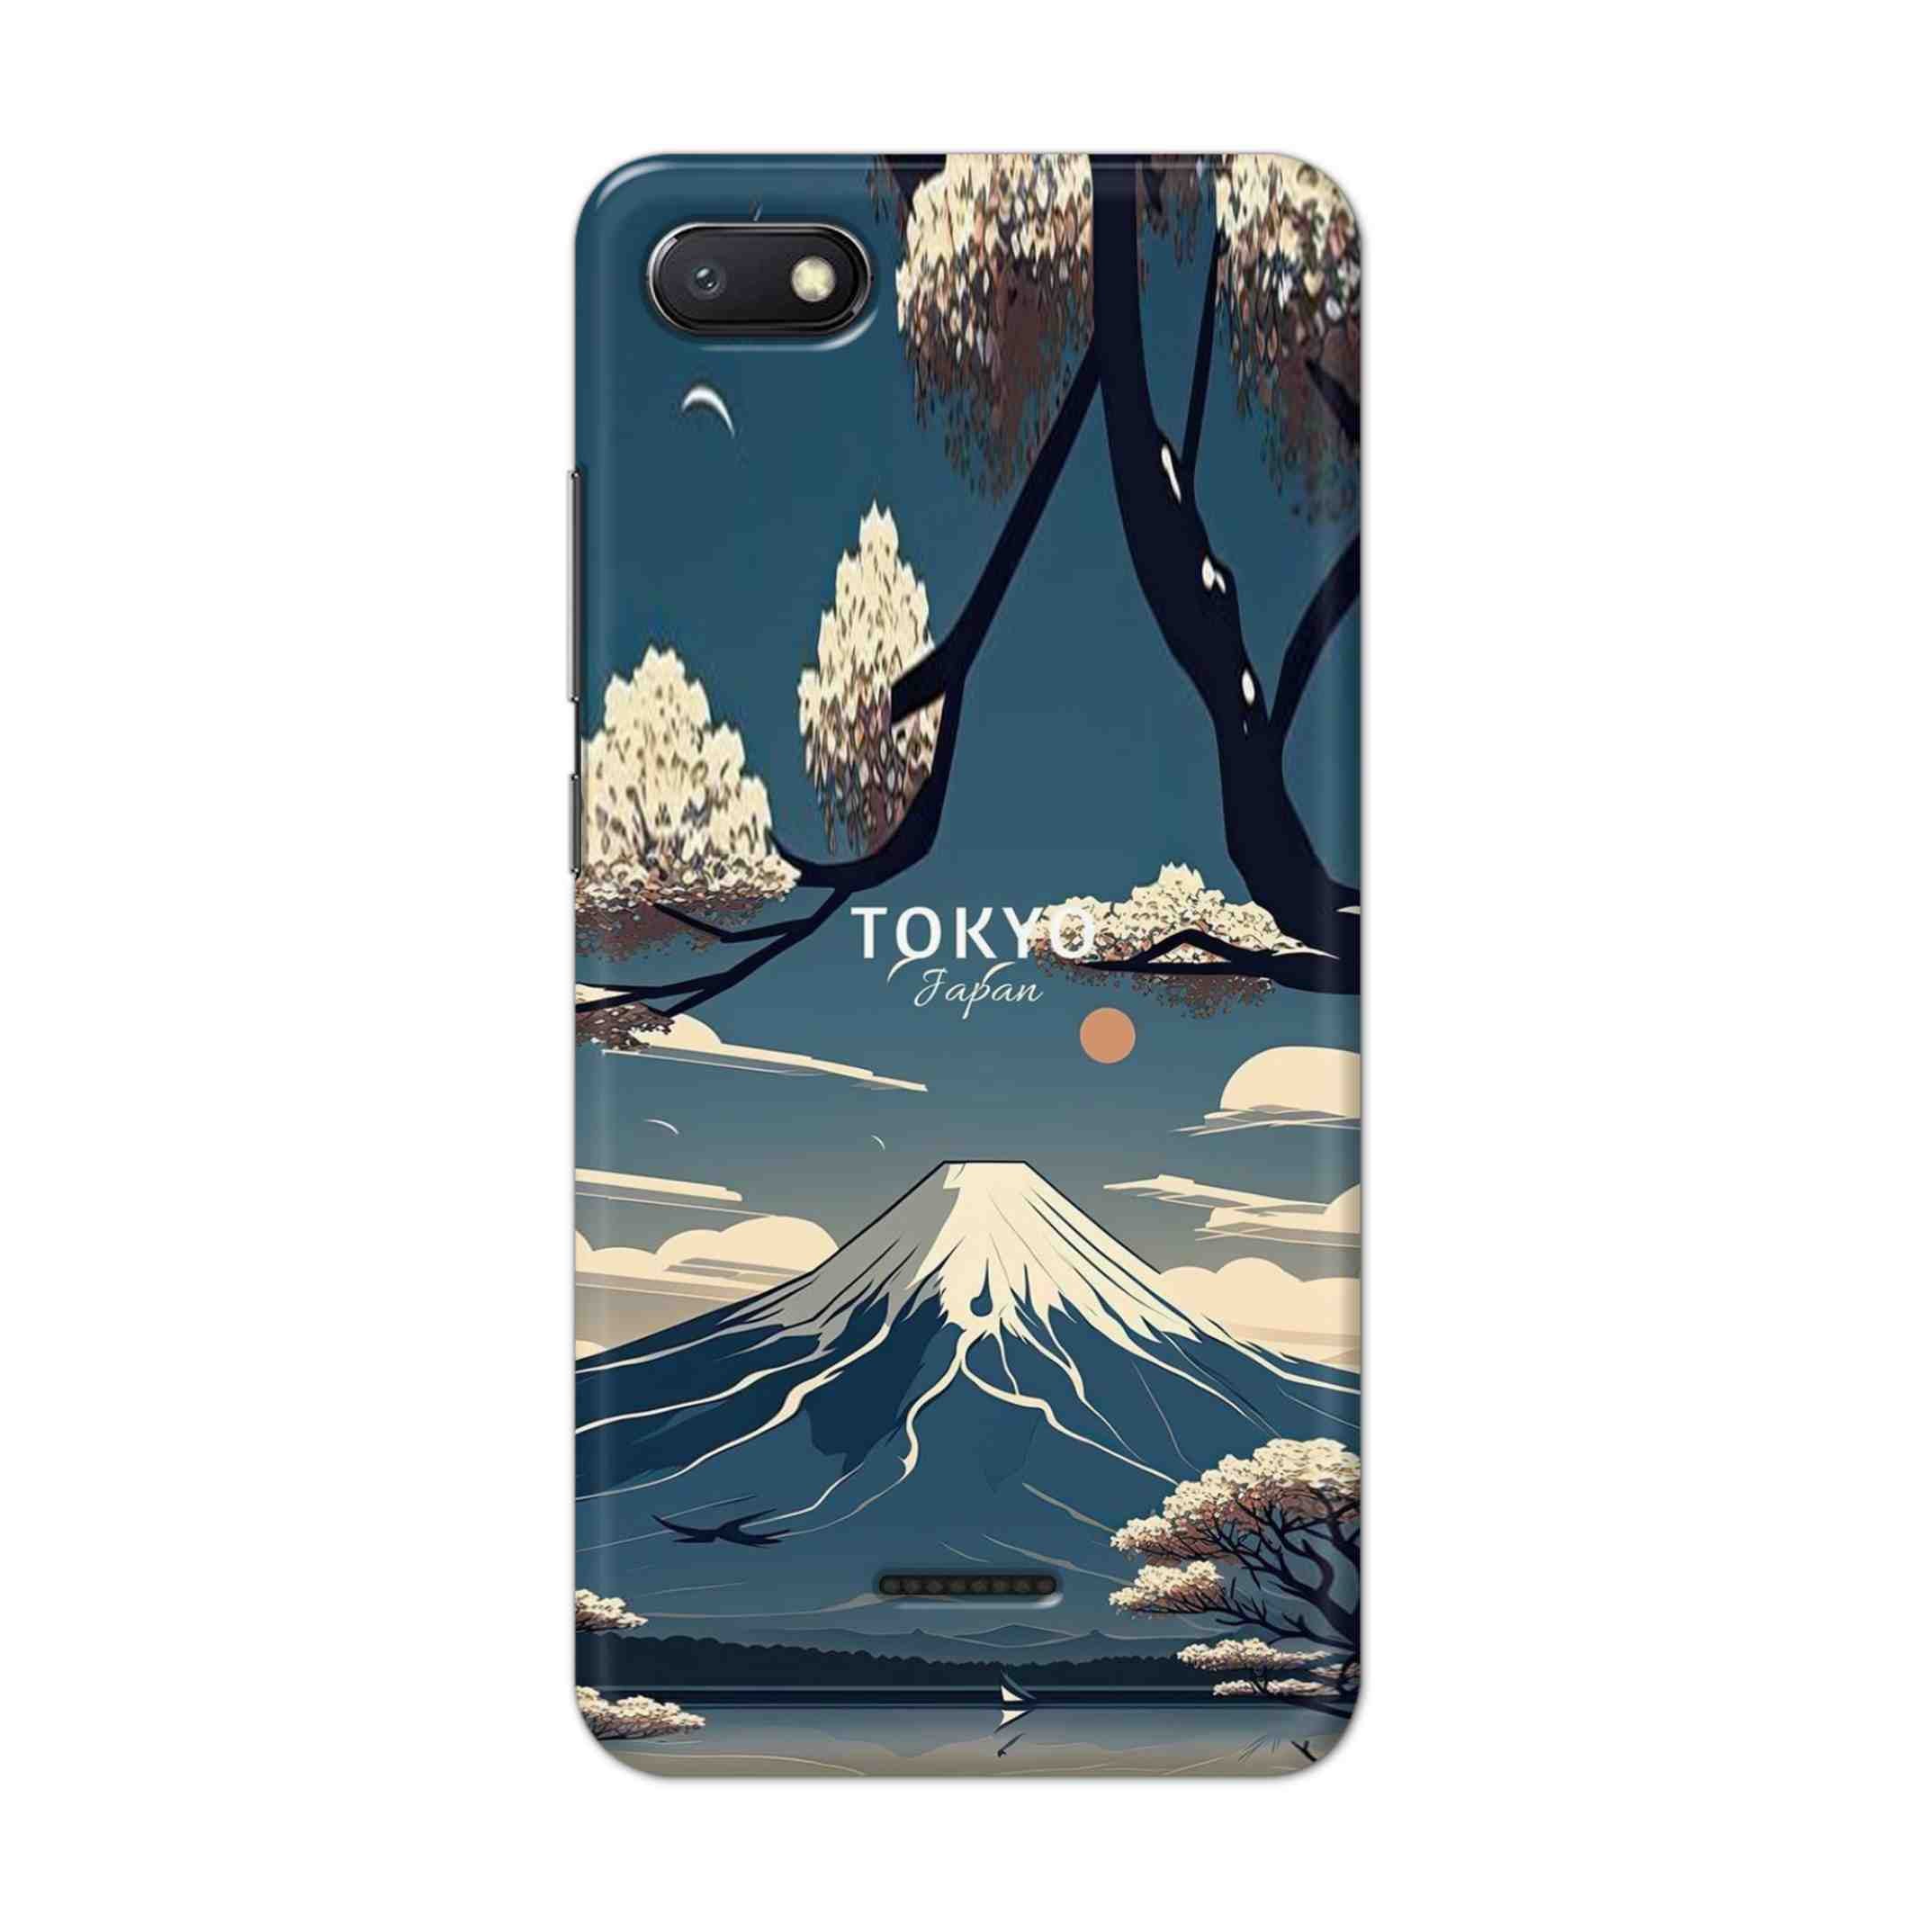 Buy Tokyo Hard Back Mobile Phone Case/Cover For Xiaomi Redmi 6A Online